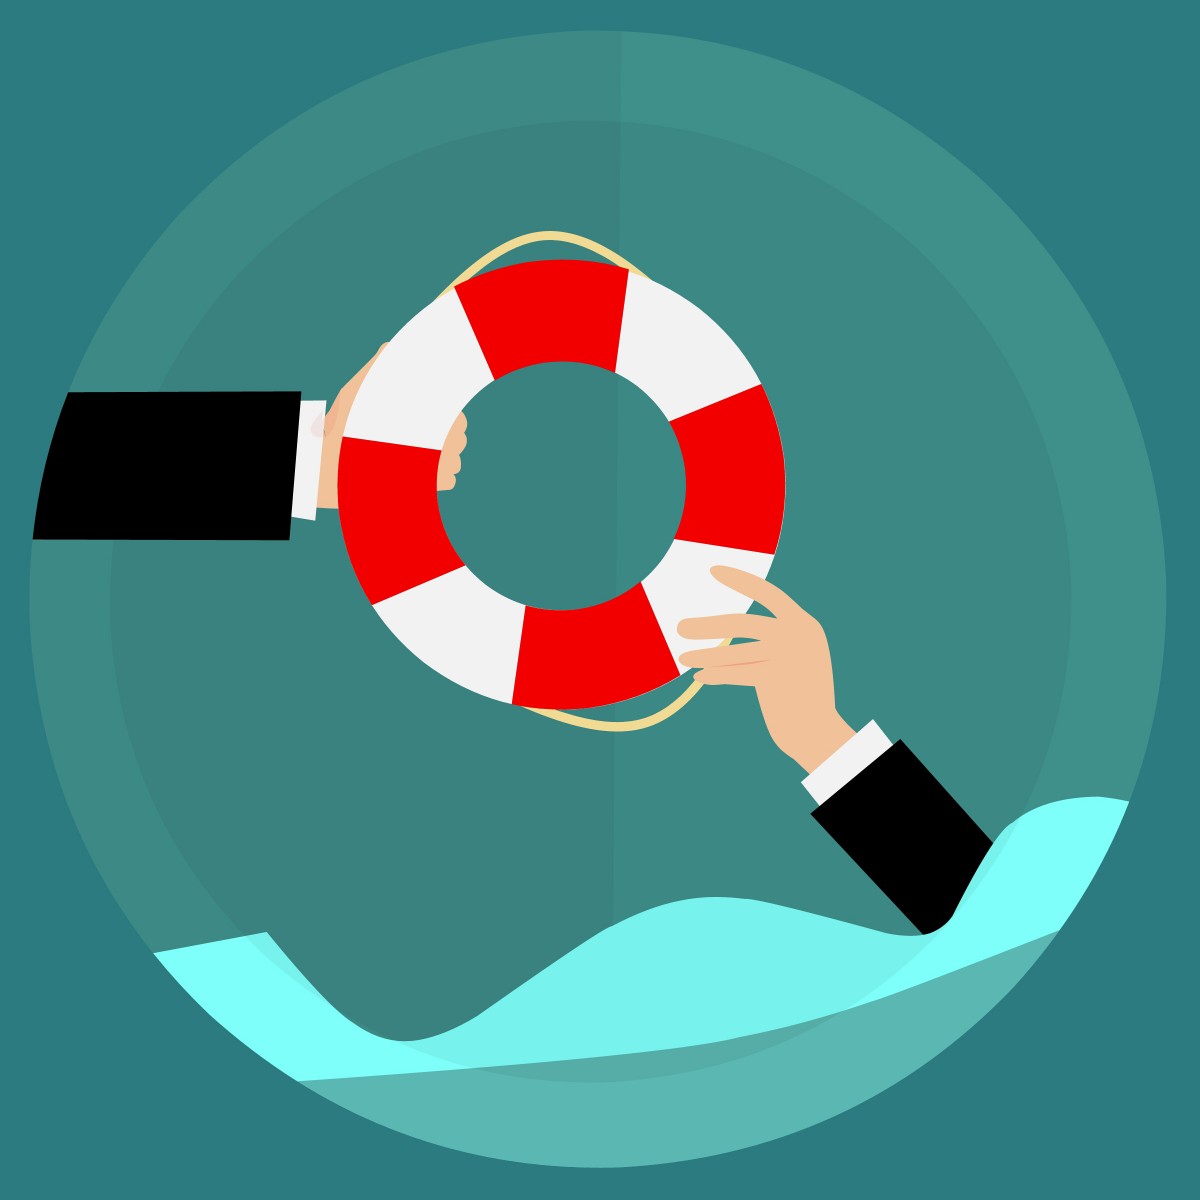 Graphic of arm in suit handing life preserver to another arm in suit that's in the water; image by Mohamed Hassan, via Pxhere.com, public domain.